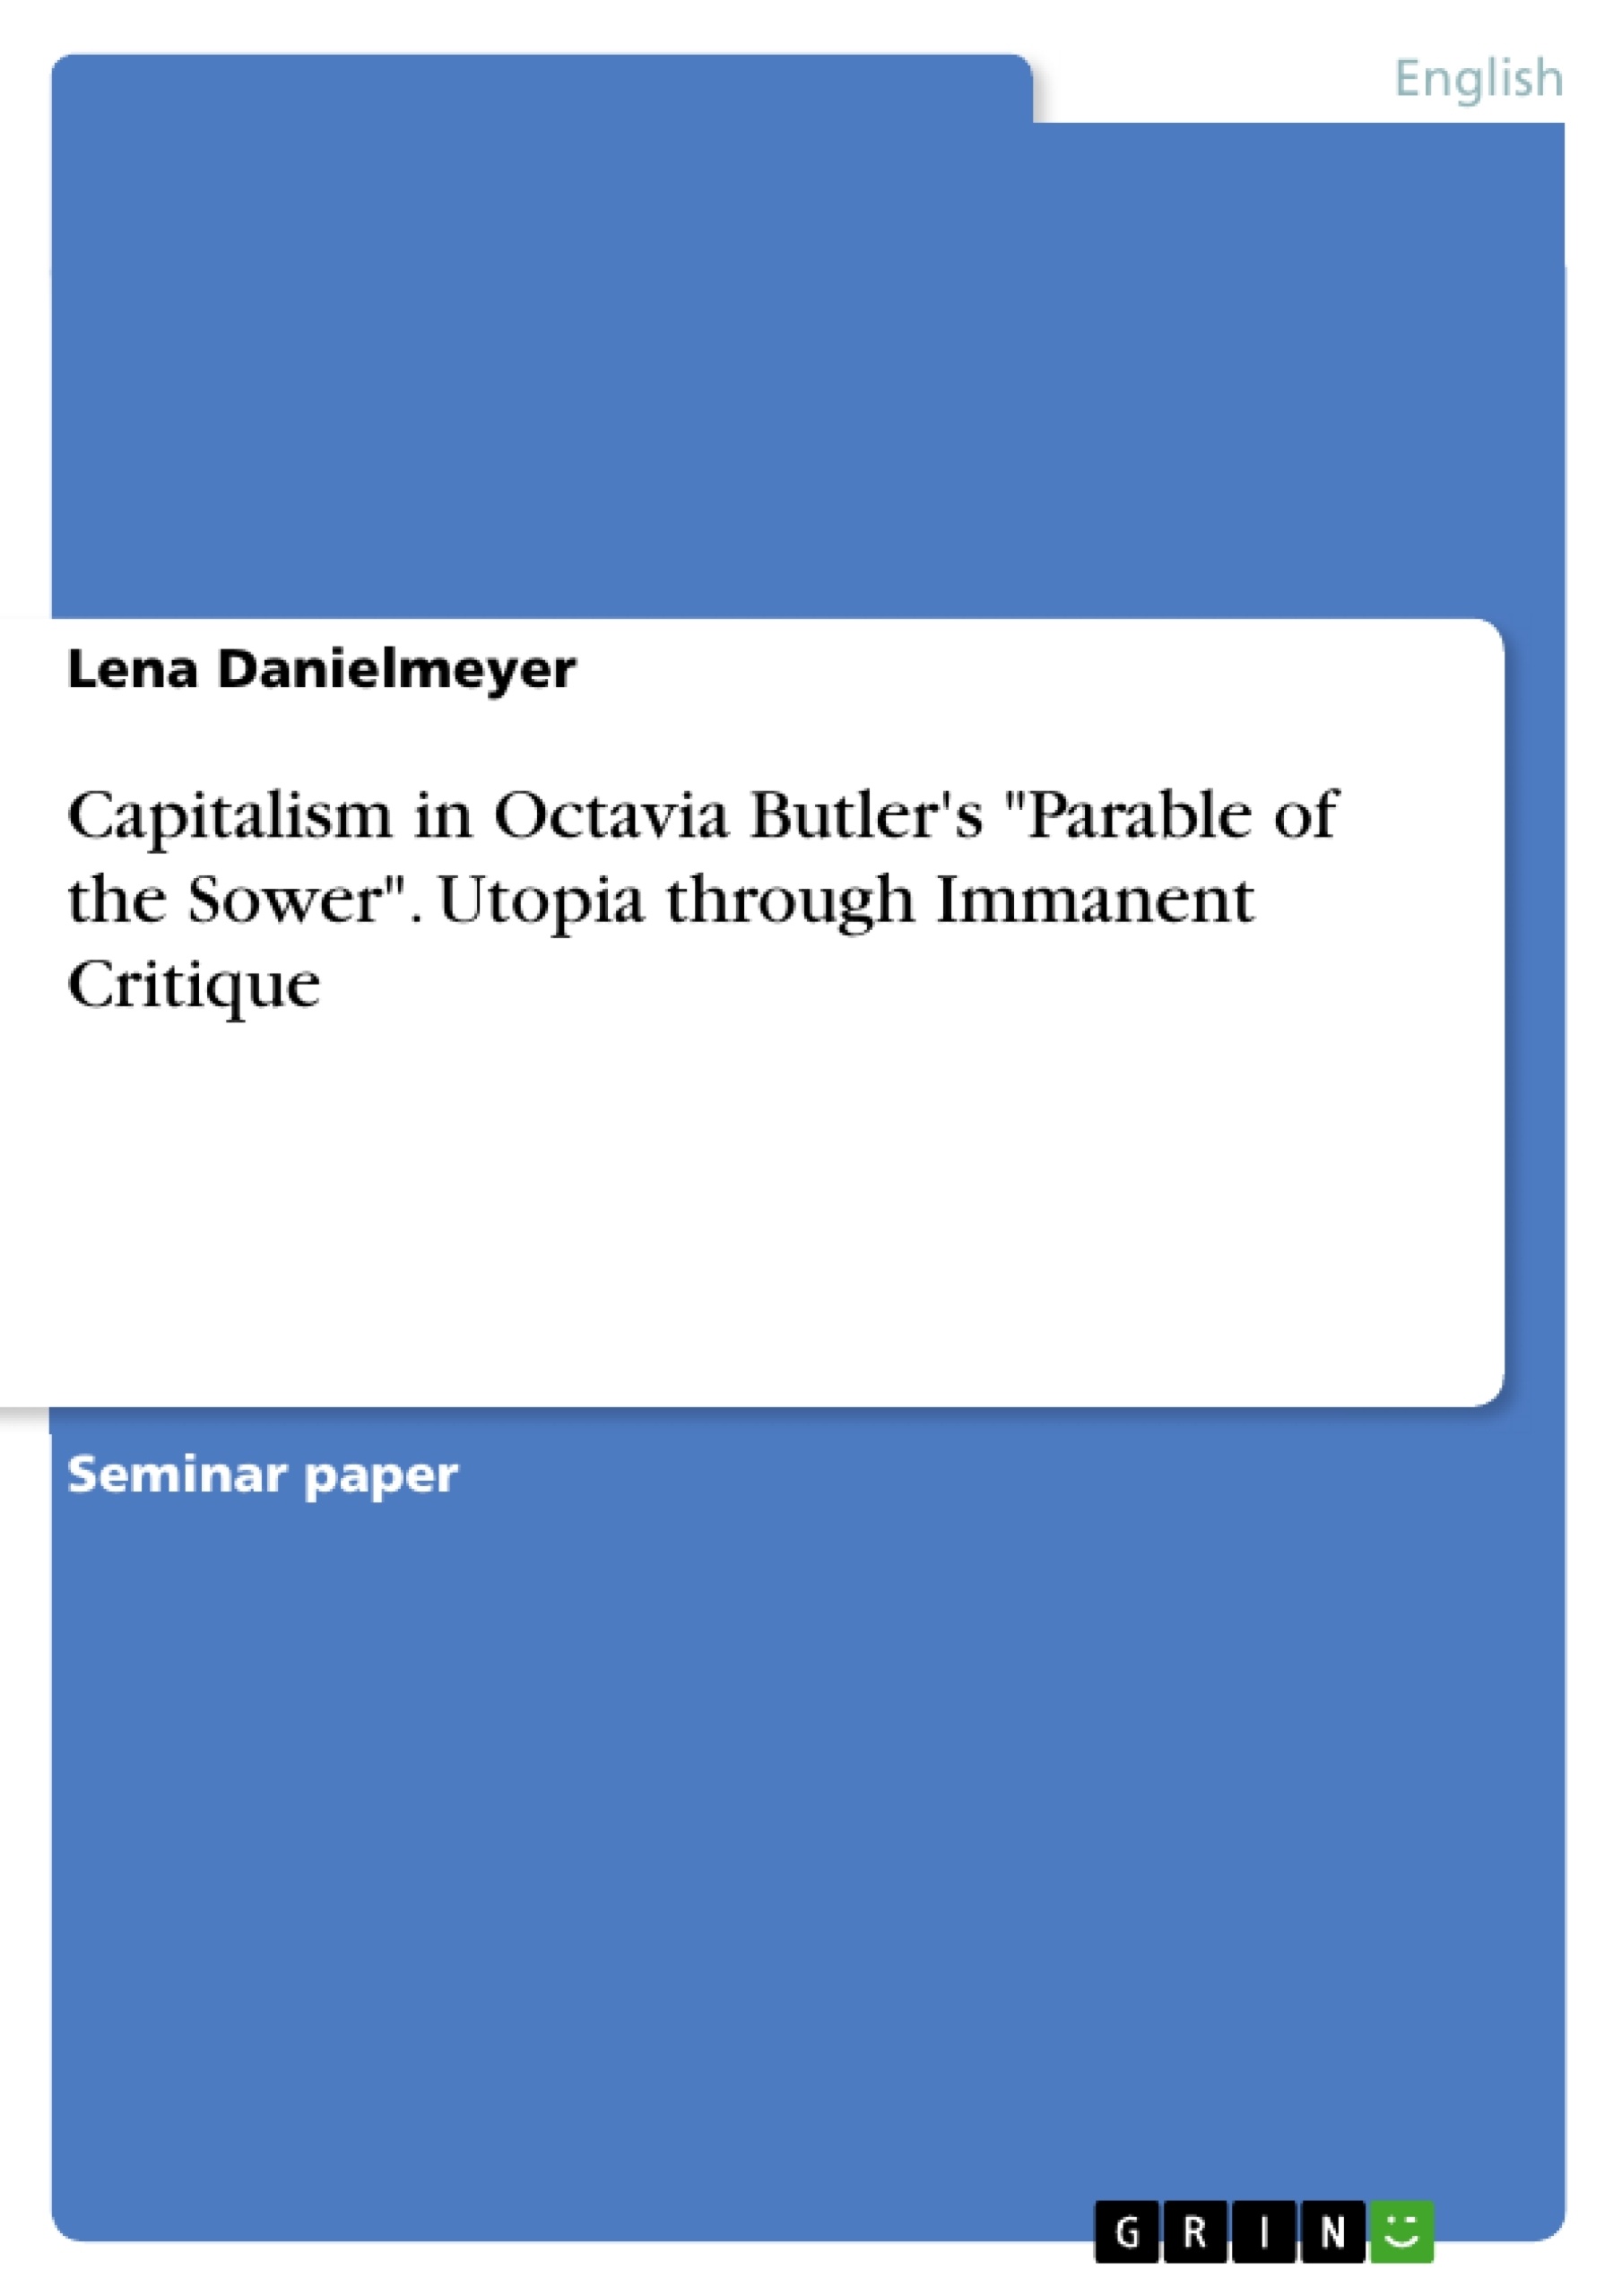 GRIN - Capitalism in Octavia Butler&#19;s "Parable of the Sower". Utopia  through Immanent Critique